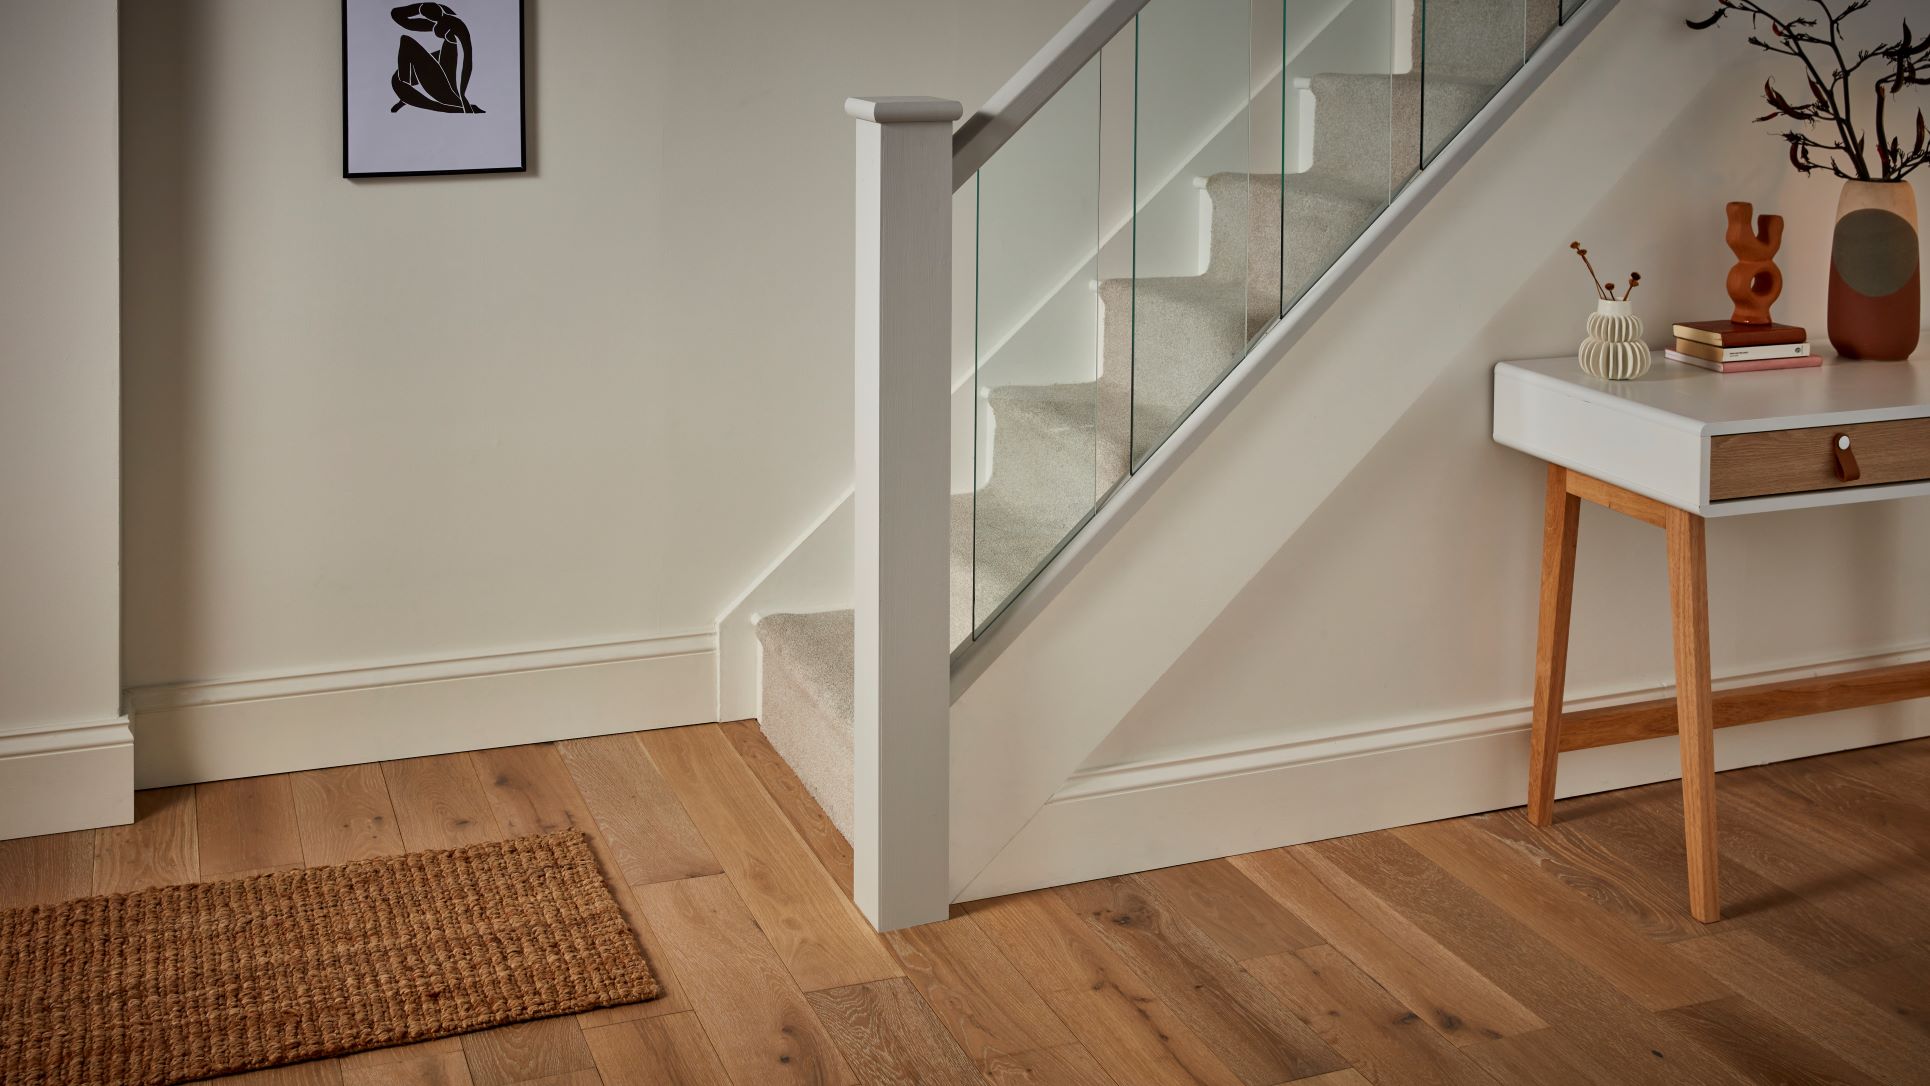 NEW Re-Newel Cladding System